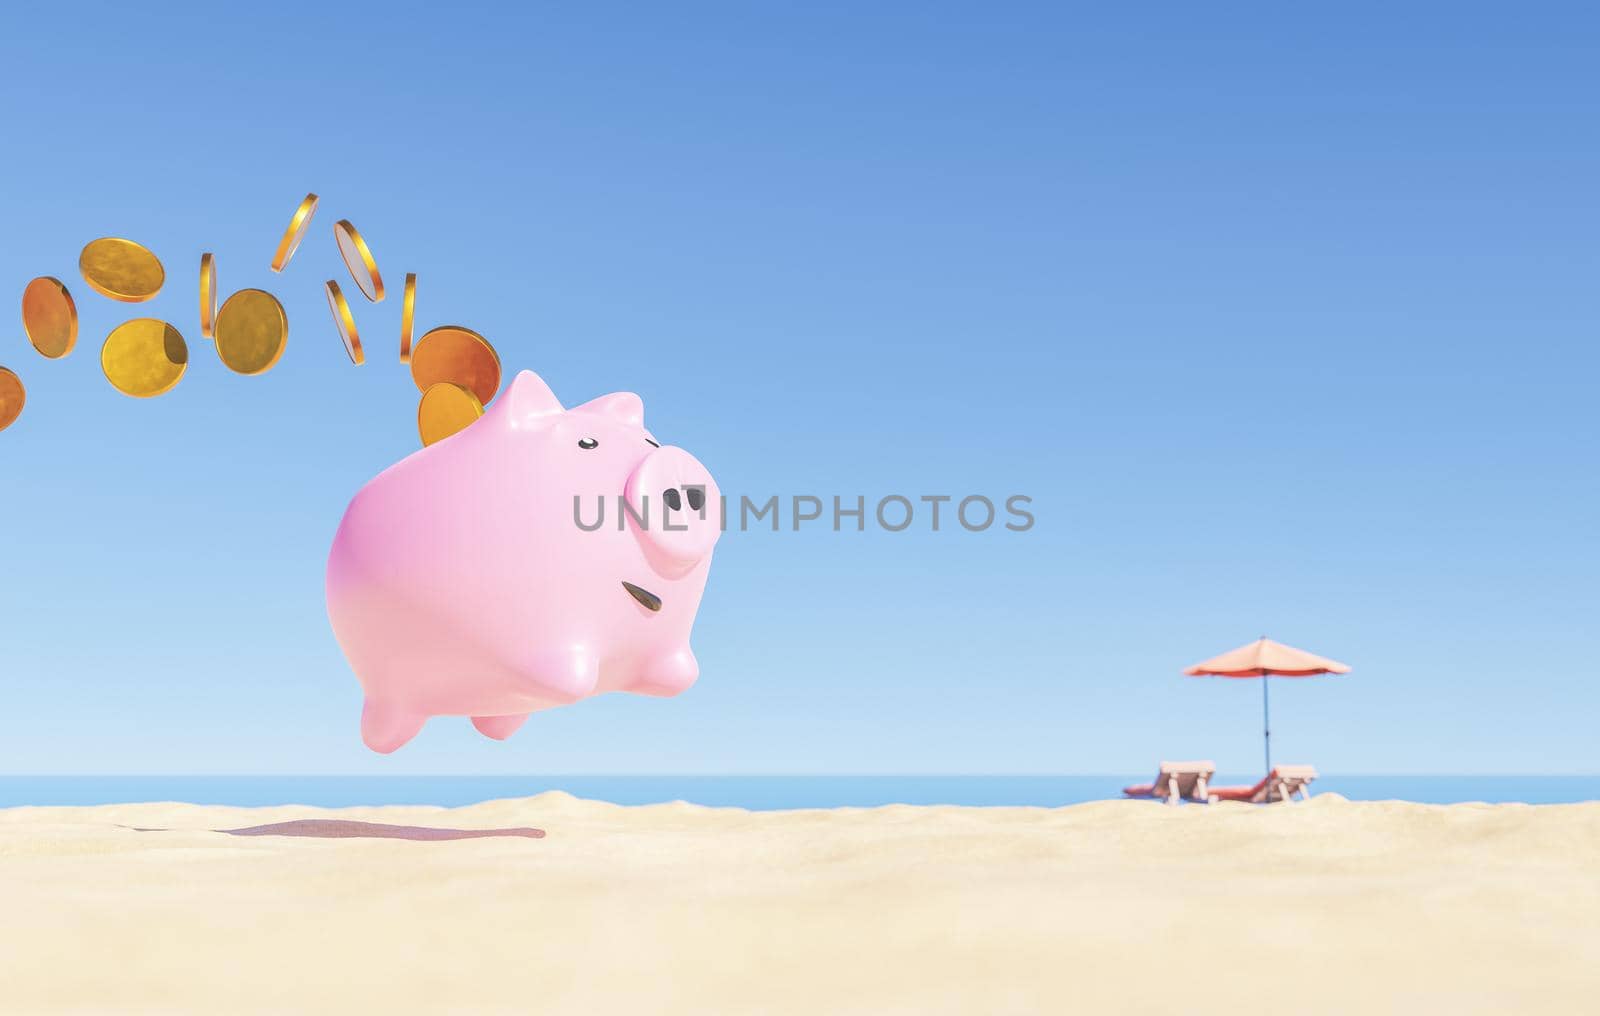 3D rendering of pink piggy bank with golden coins jumping over sandy beach near sunbed and umbrella placed at seafront against cloudless blue sky